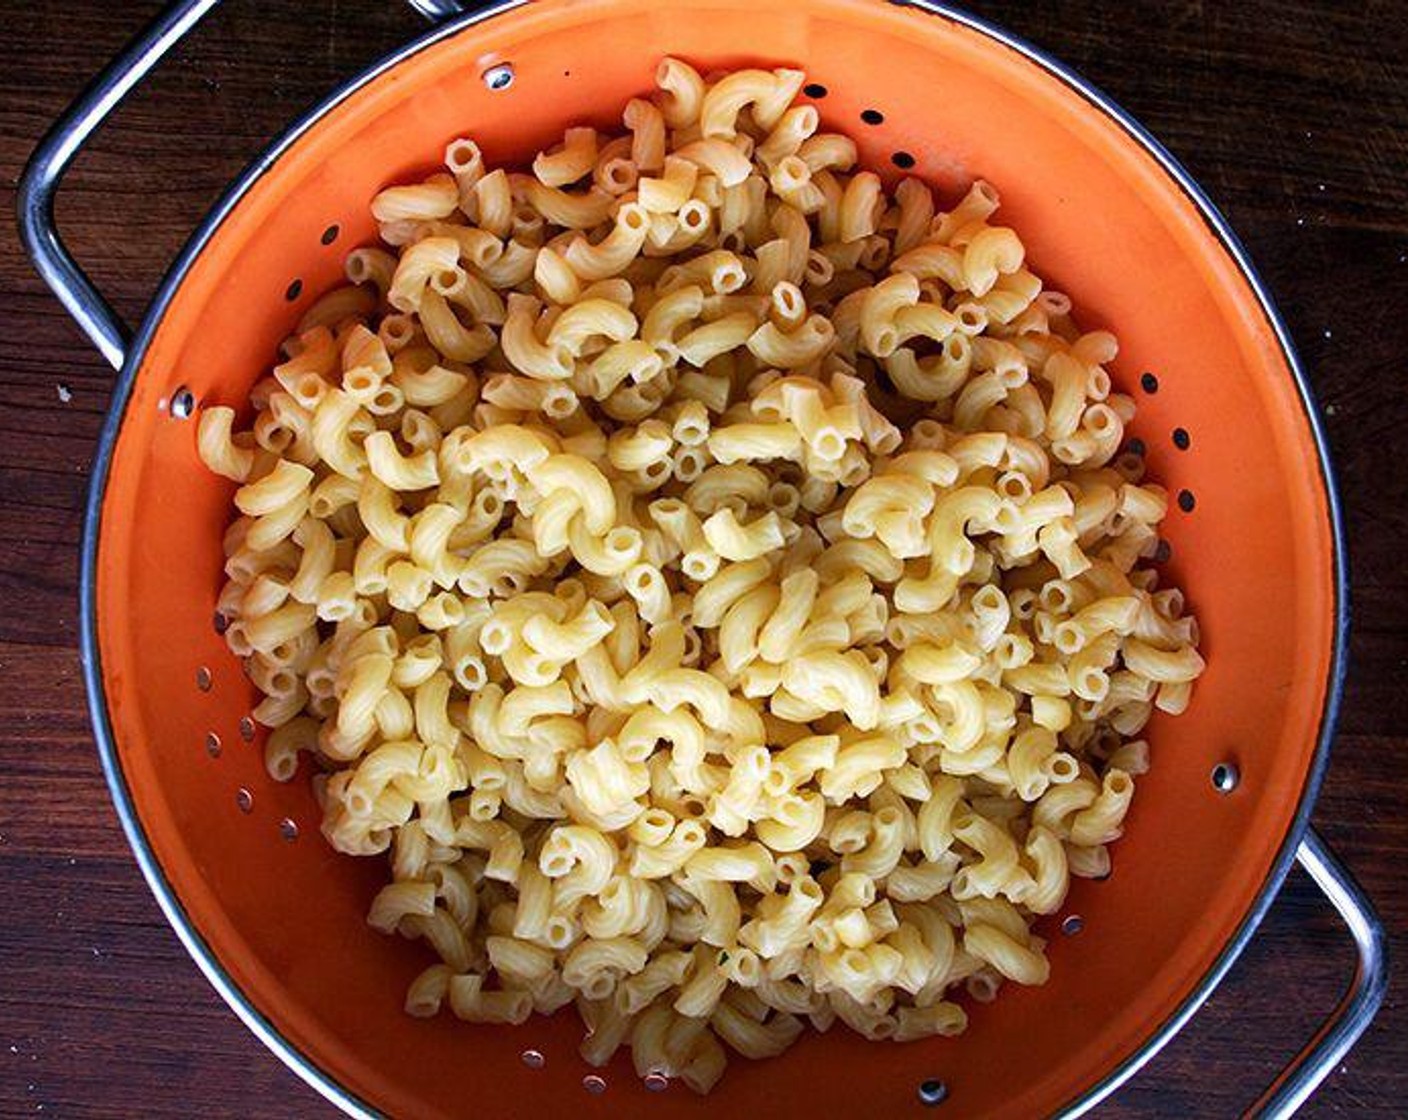 step 2 Bring a large pot of water to a boil. Add Kosher Salt (1 Tbsp). Boil Elbow Macaroni (13 oz) for about 5 minutes, or for 2 minutes less than the box's suggested al dente time. Drain. Do not rinse. Set aside.